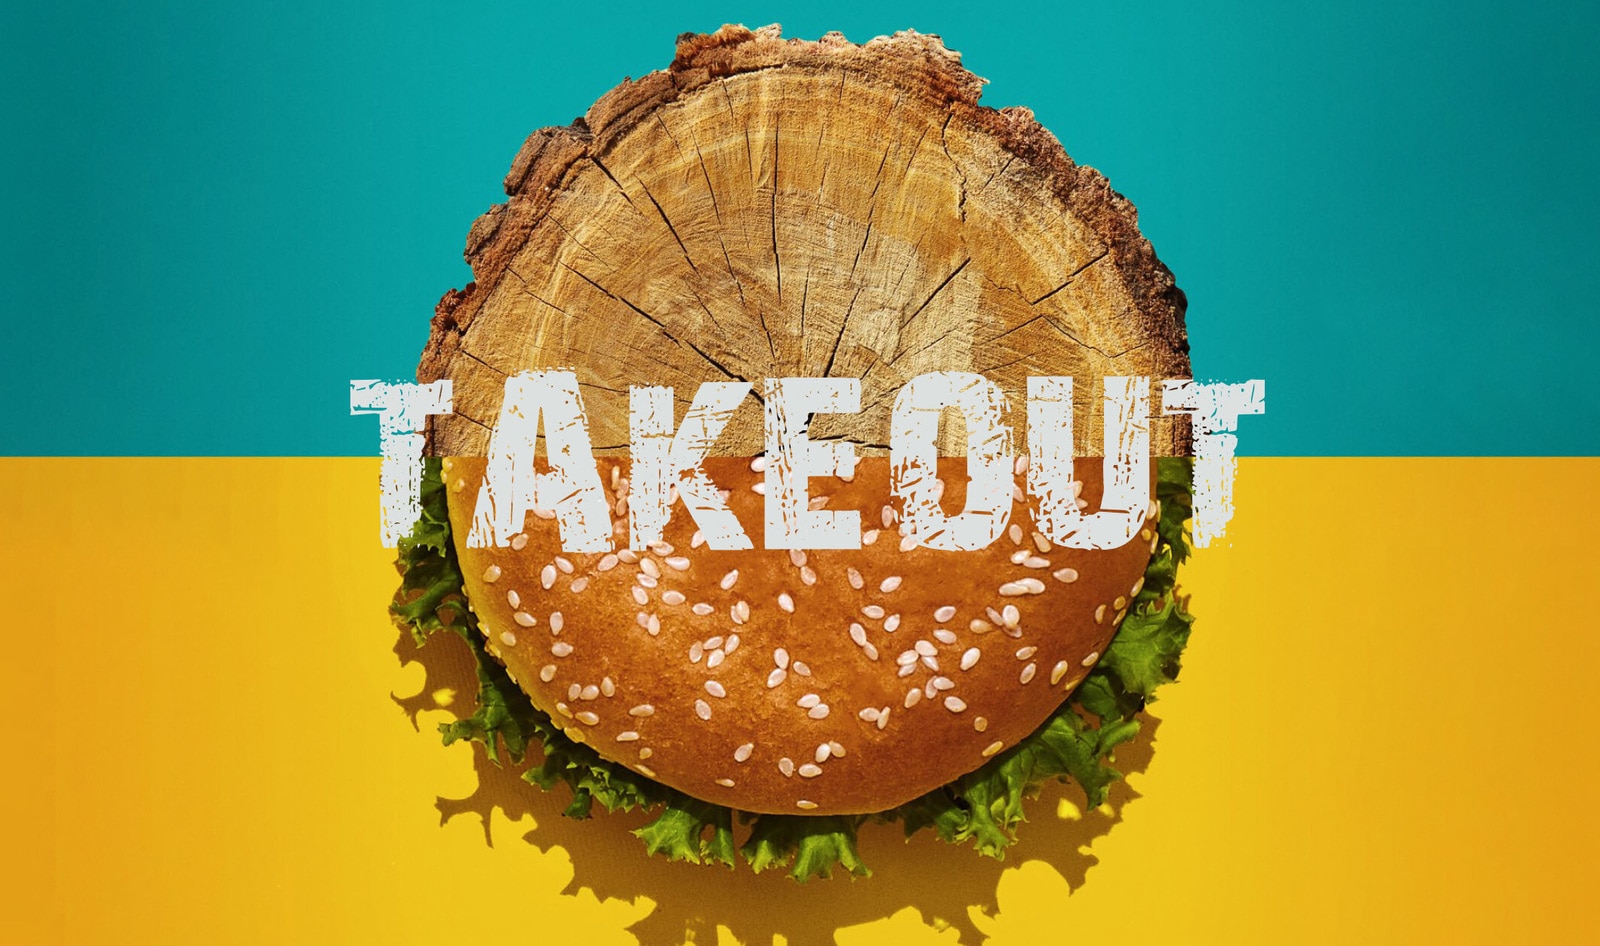 New Vegan Documentary <i>Takeout</i> Connects Animal Agriculture and Amazon Deforestation